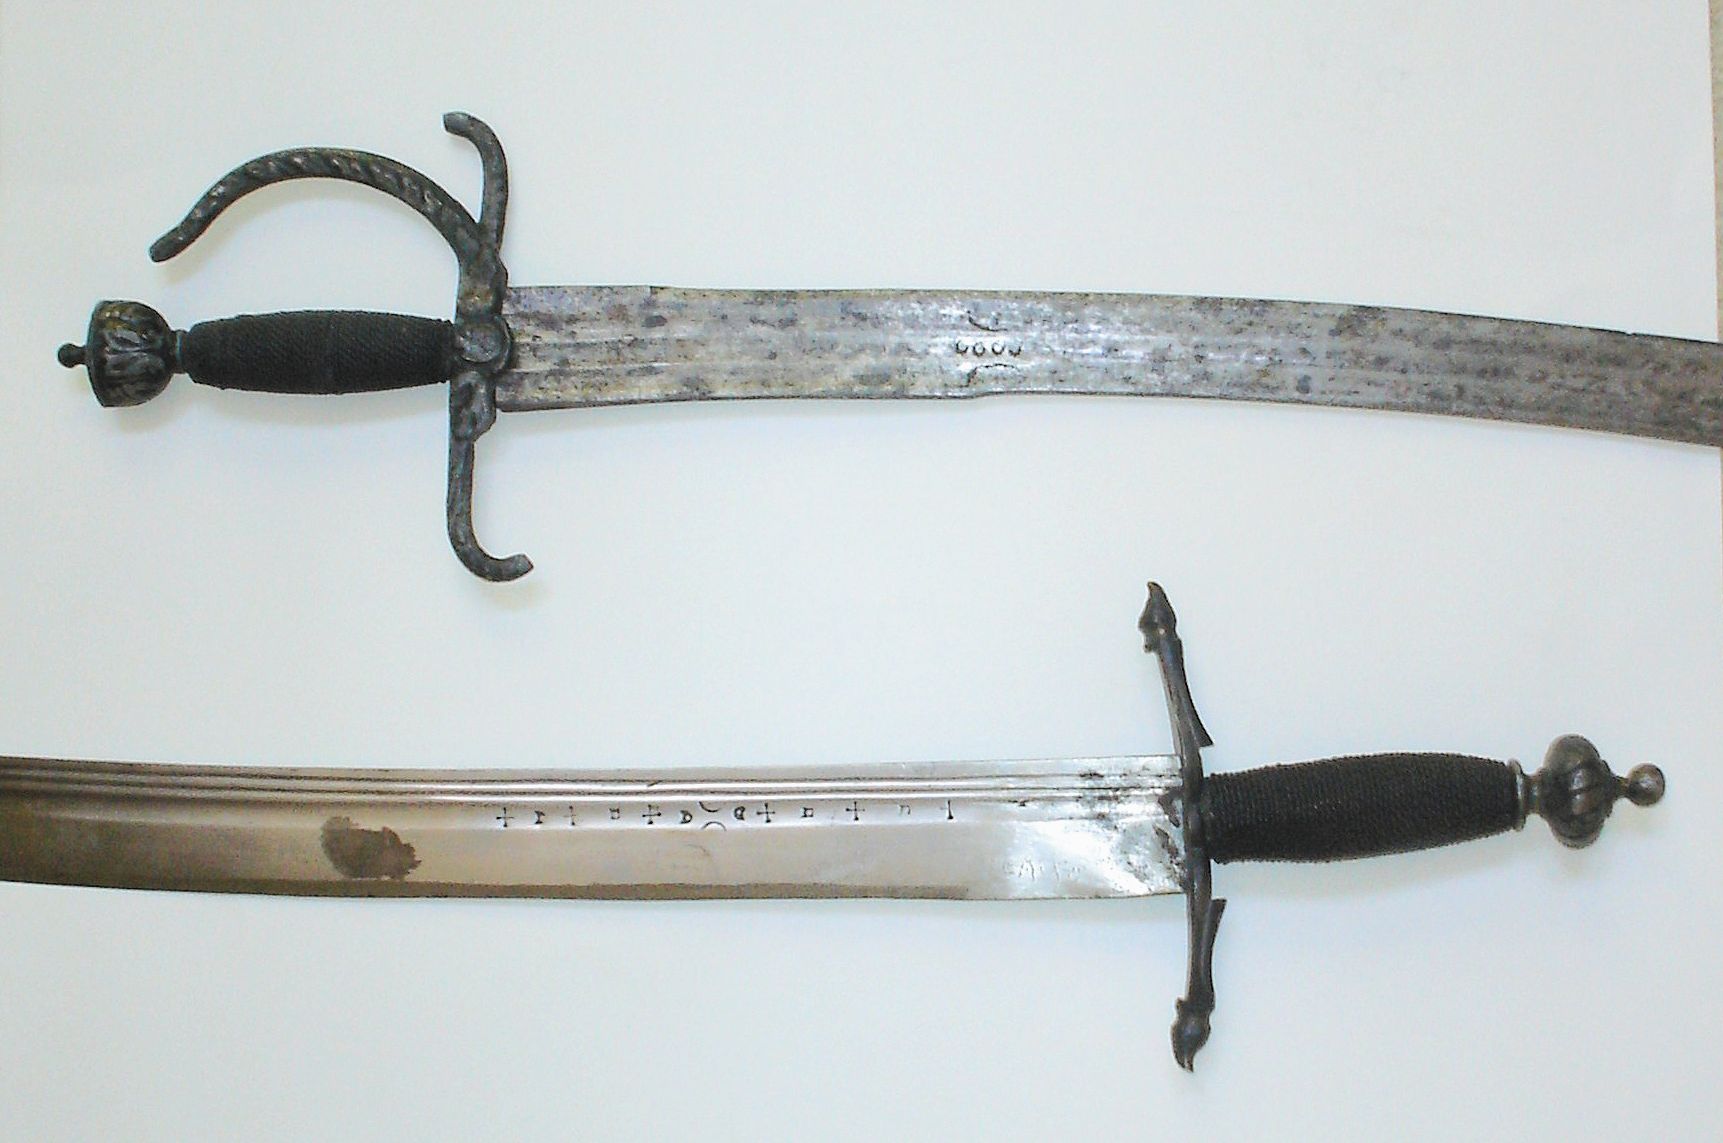 Curved swords shown in detail.